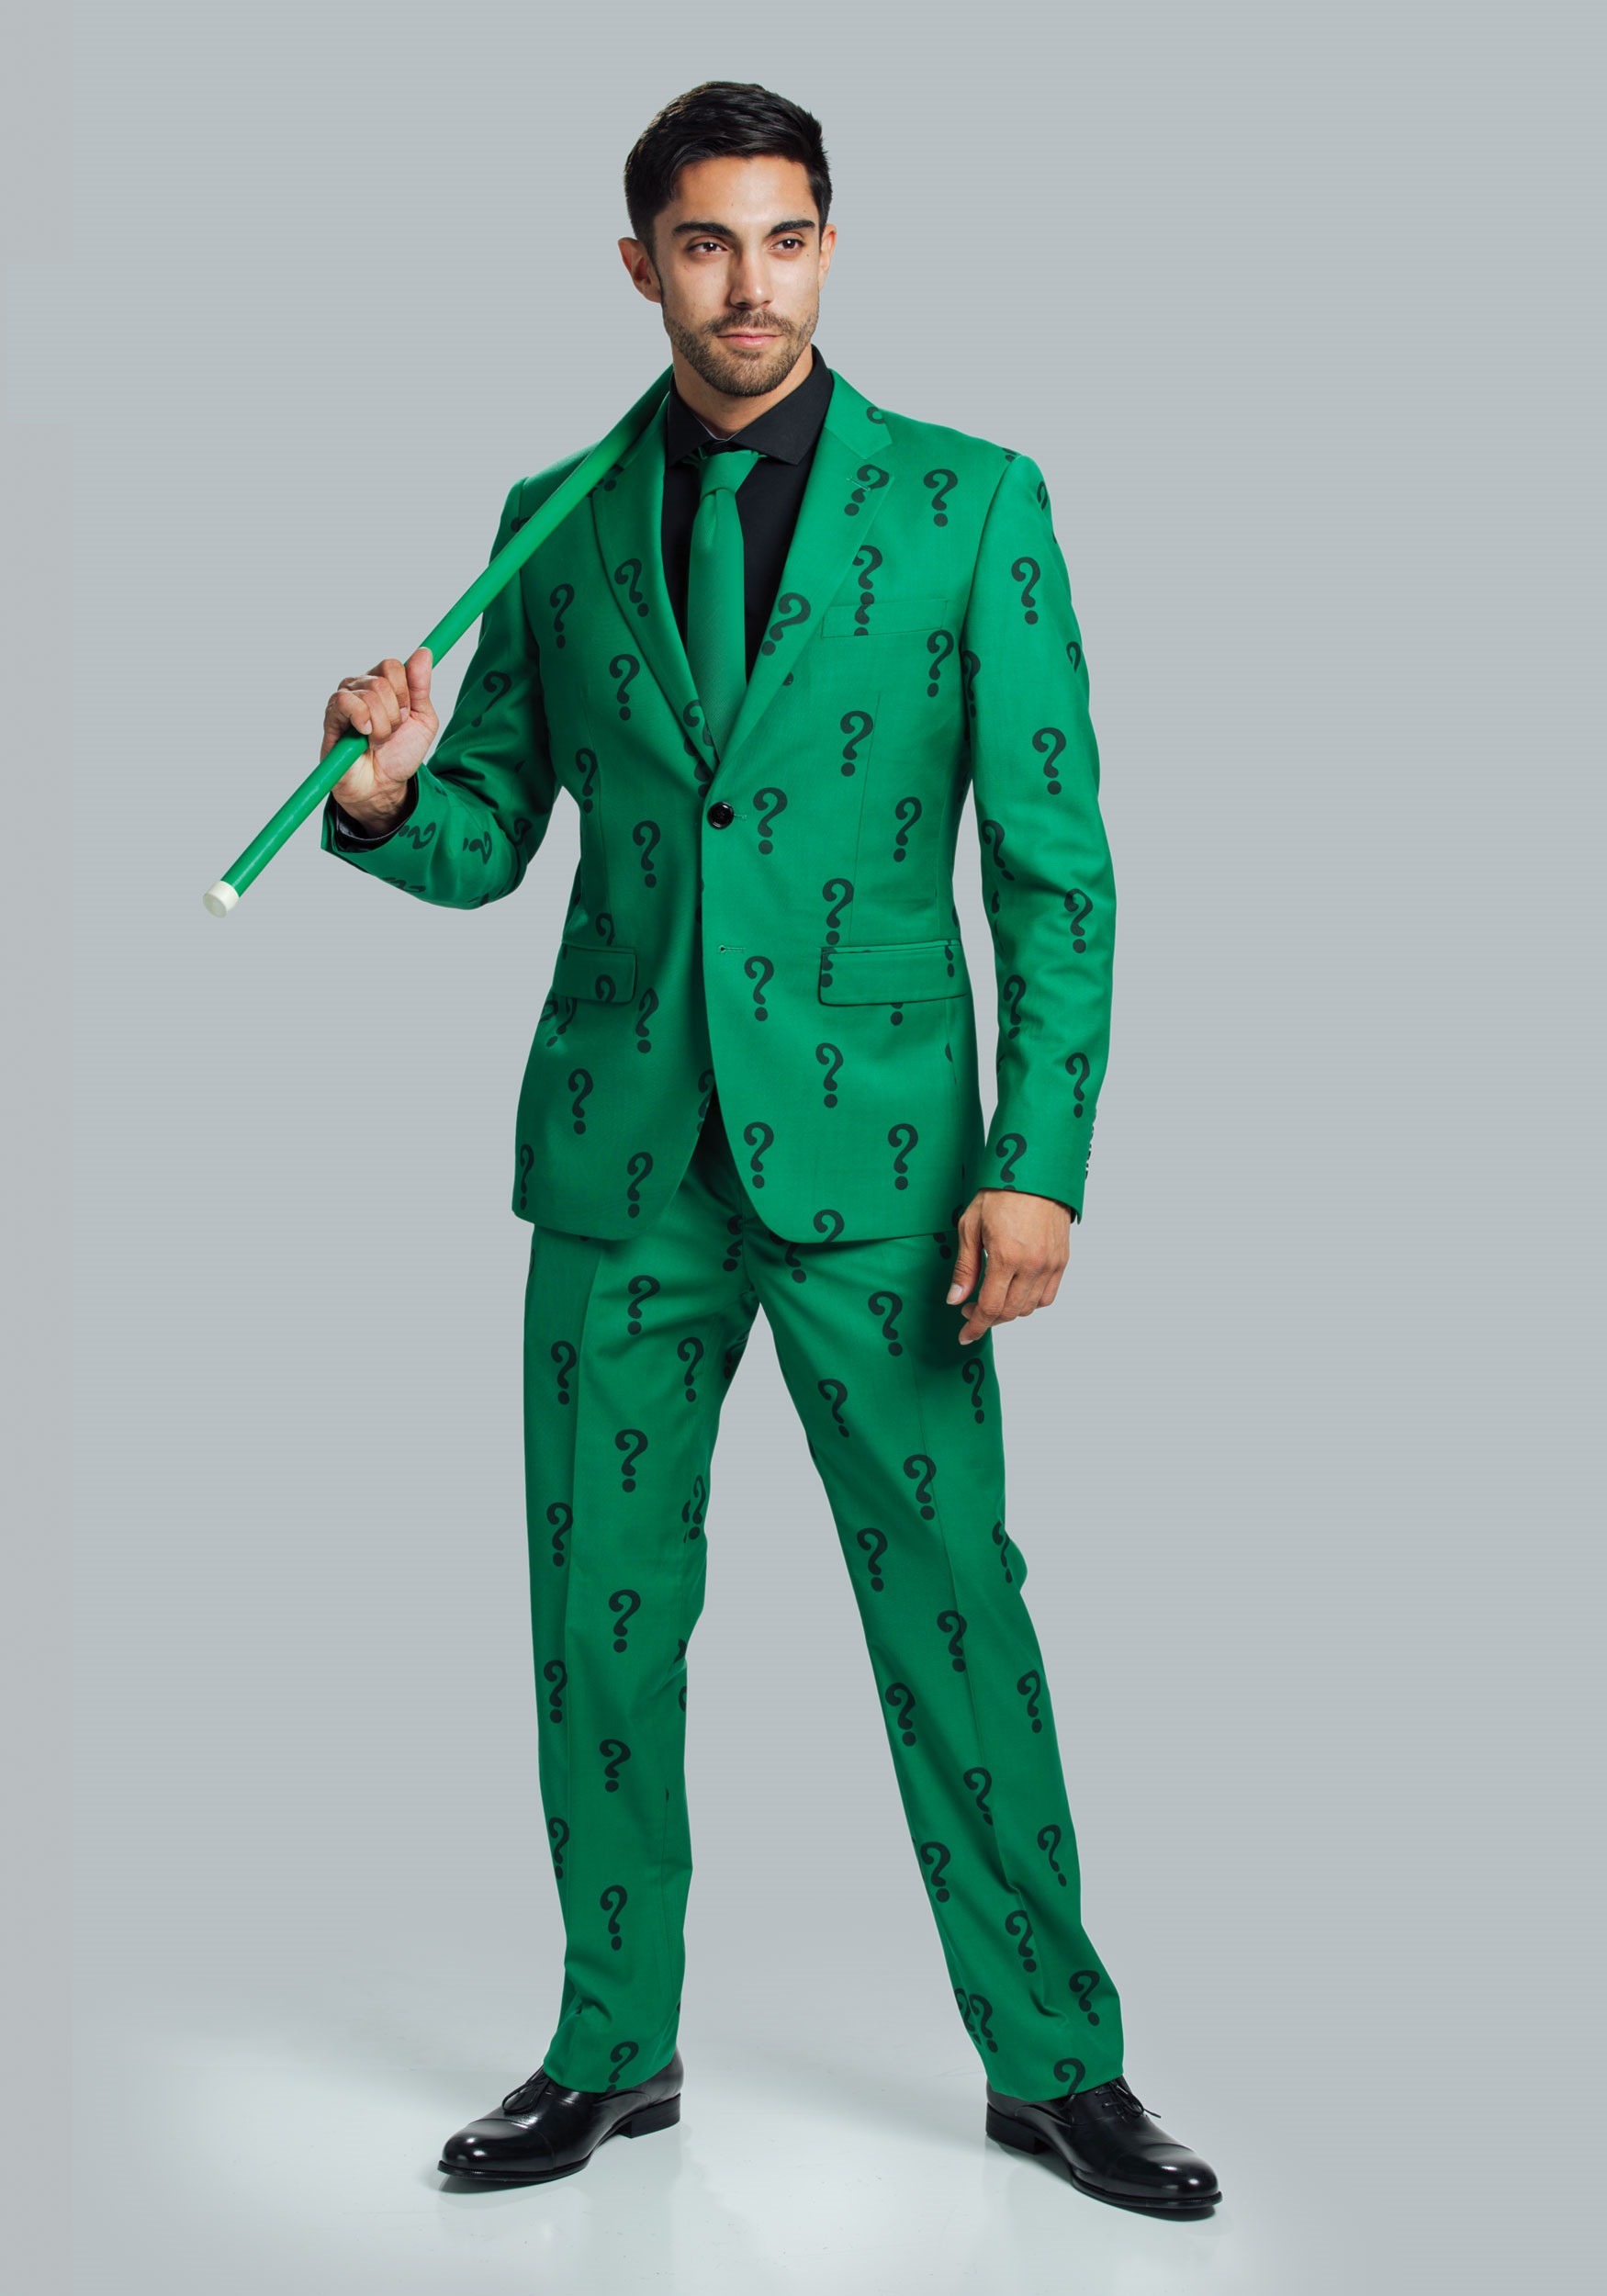 Authentic The Riddler Suit